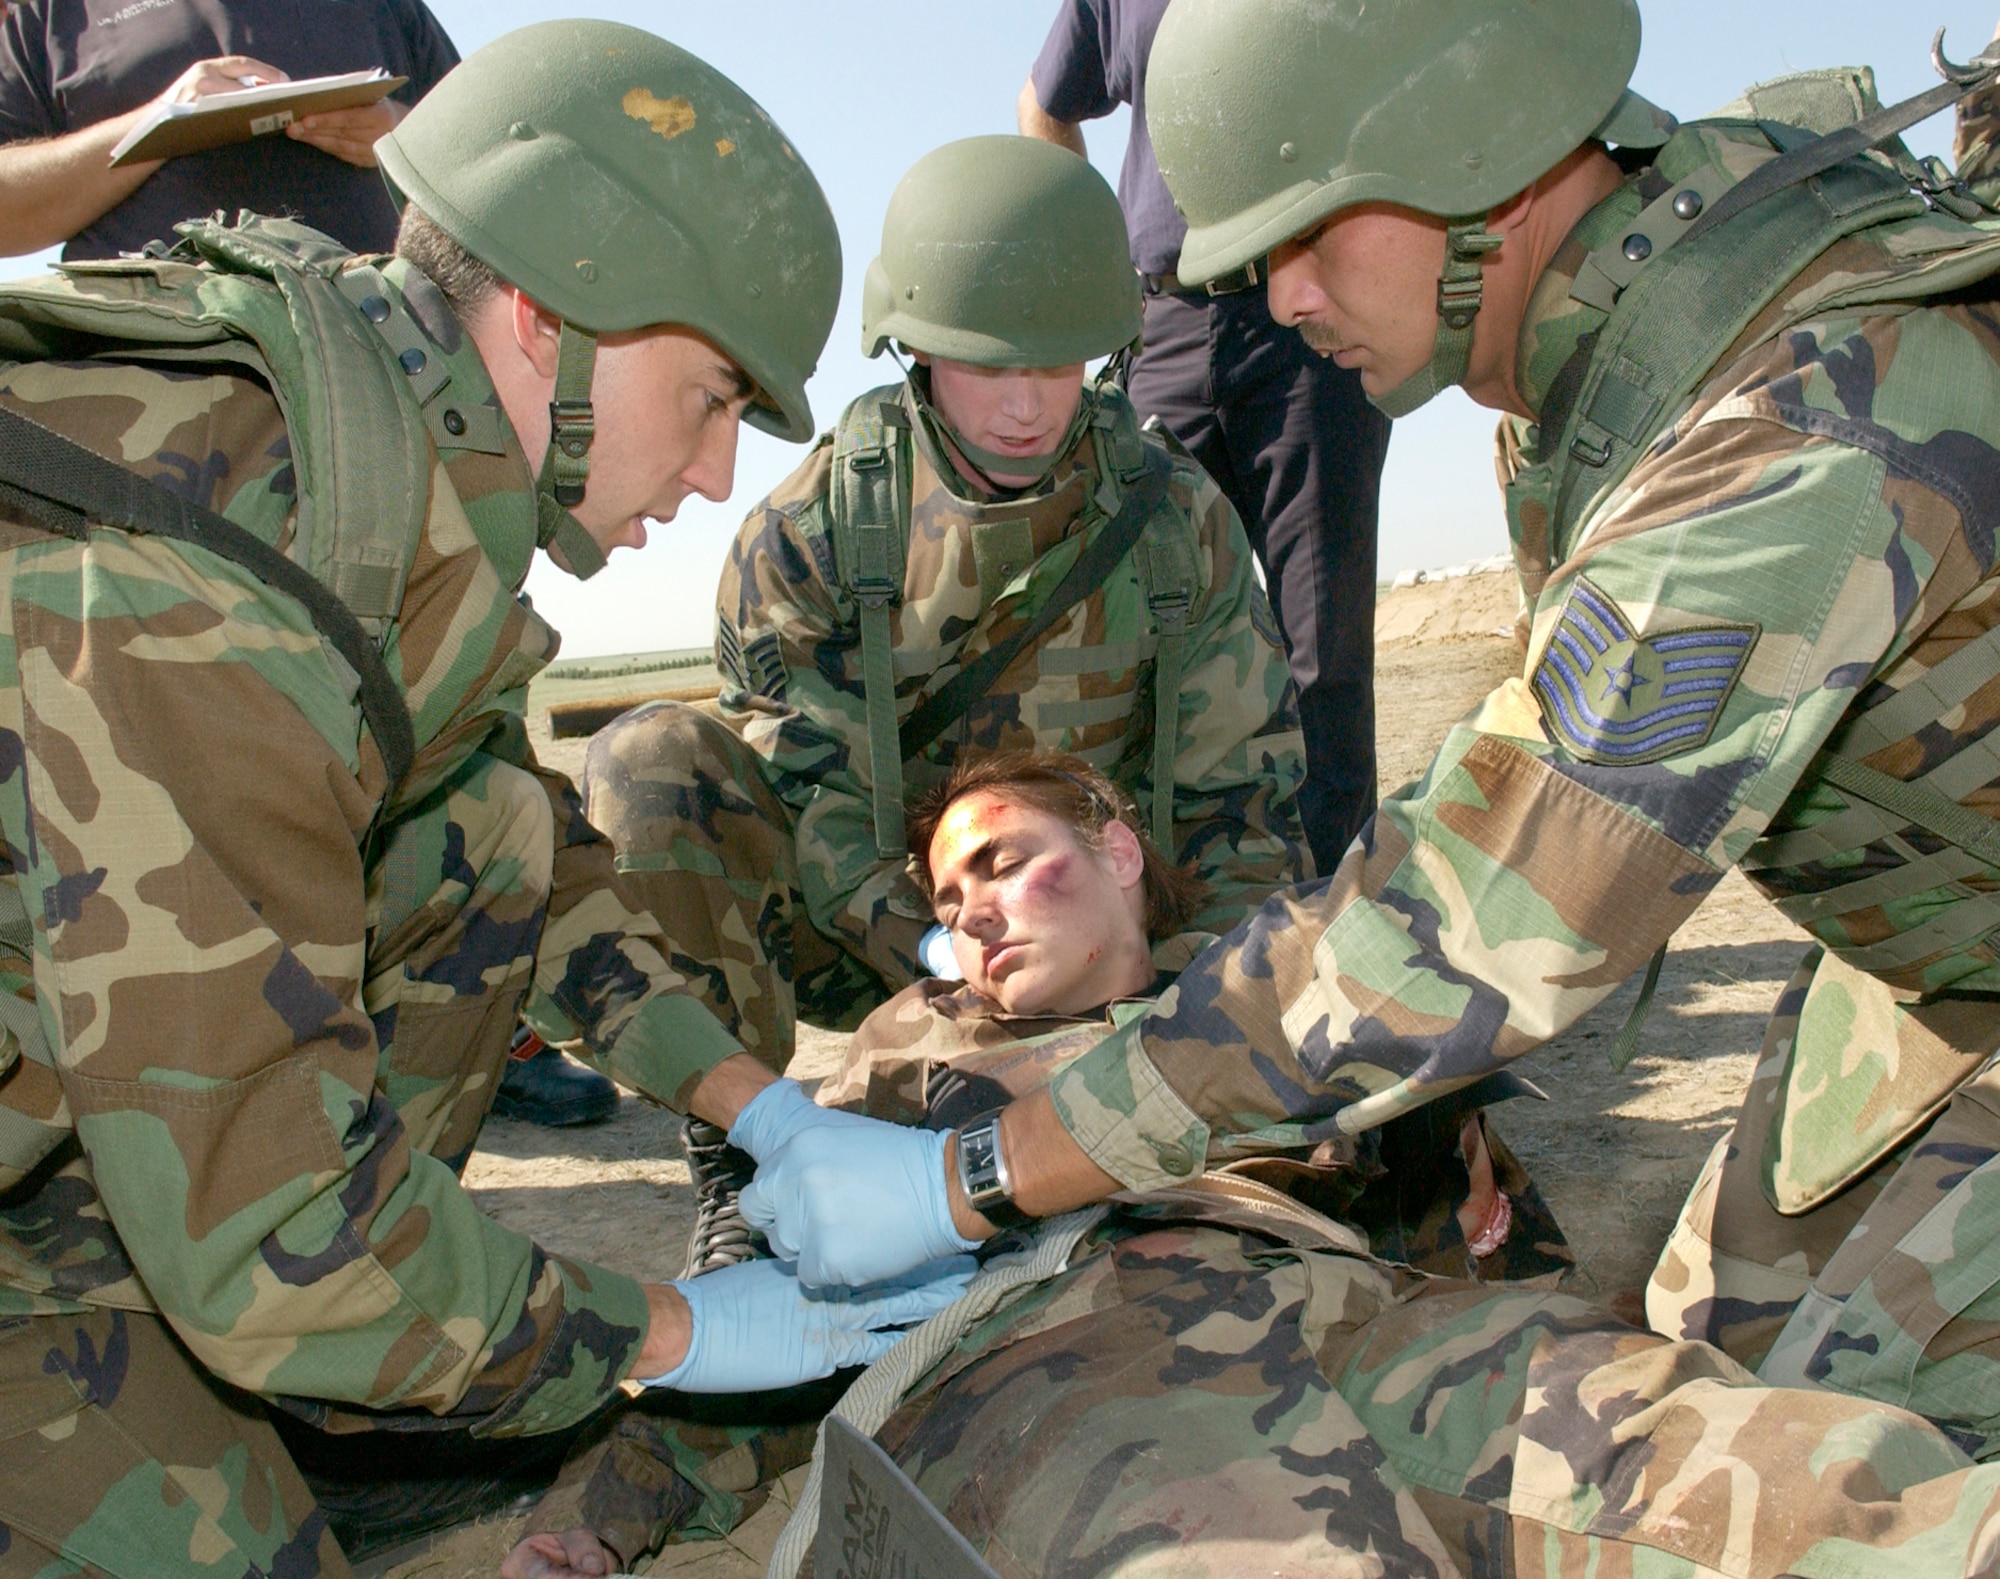 Capt. Kevin James (left), Staff Sgt. Michael Johns (center), and Tech. Sgt. Robert Norris (right), 2nd Space Warning Squadron assist the "victim" Staff Sgt. Lisa Harmon, 460th Medical Group, during the Self Aid and Buddy Care competition held at Camp Rattlesnake July 13. Sergeant Harmon had "suffered" multiple wounds from a simulated mortar explosion. Enduring 100-degree weather, teams representing various units in the 460th Space Wing competed in the practical test and obstacle course carrying a 155 pound dummy on a stretcher. (Air Force photo by Staff Sgt. Chenzira Mallory)